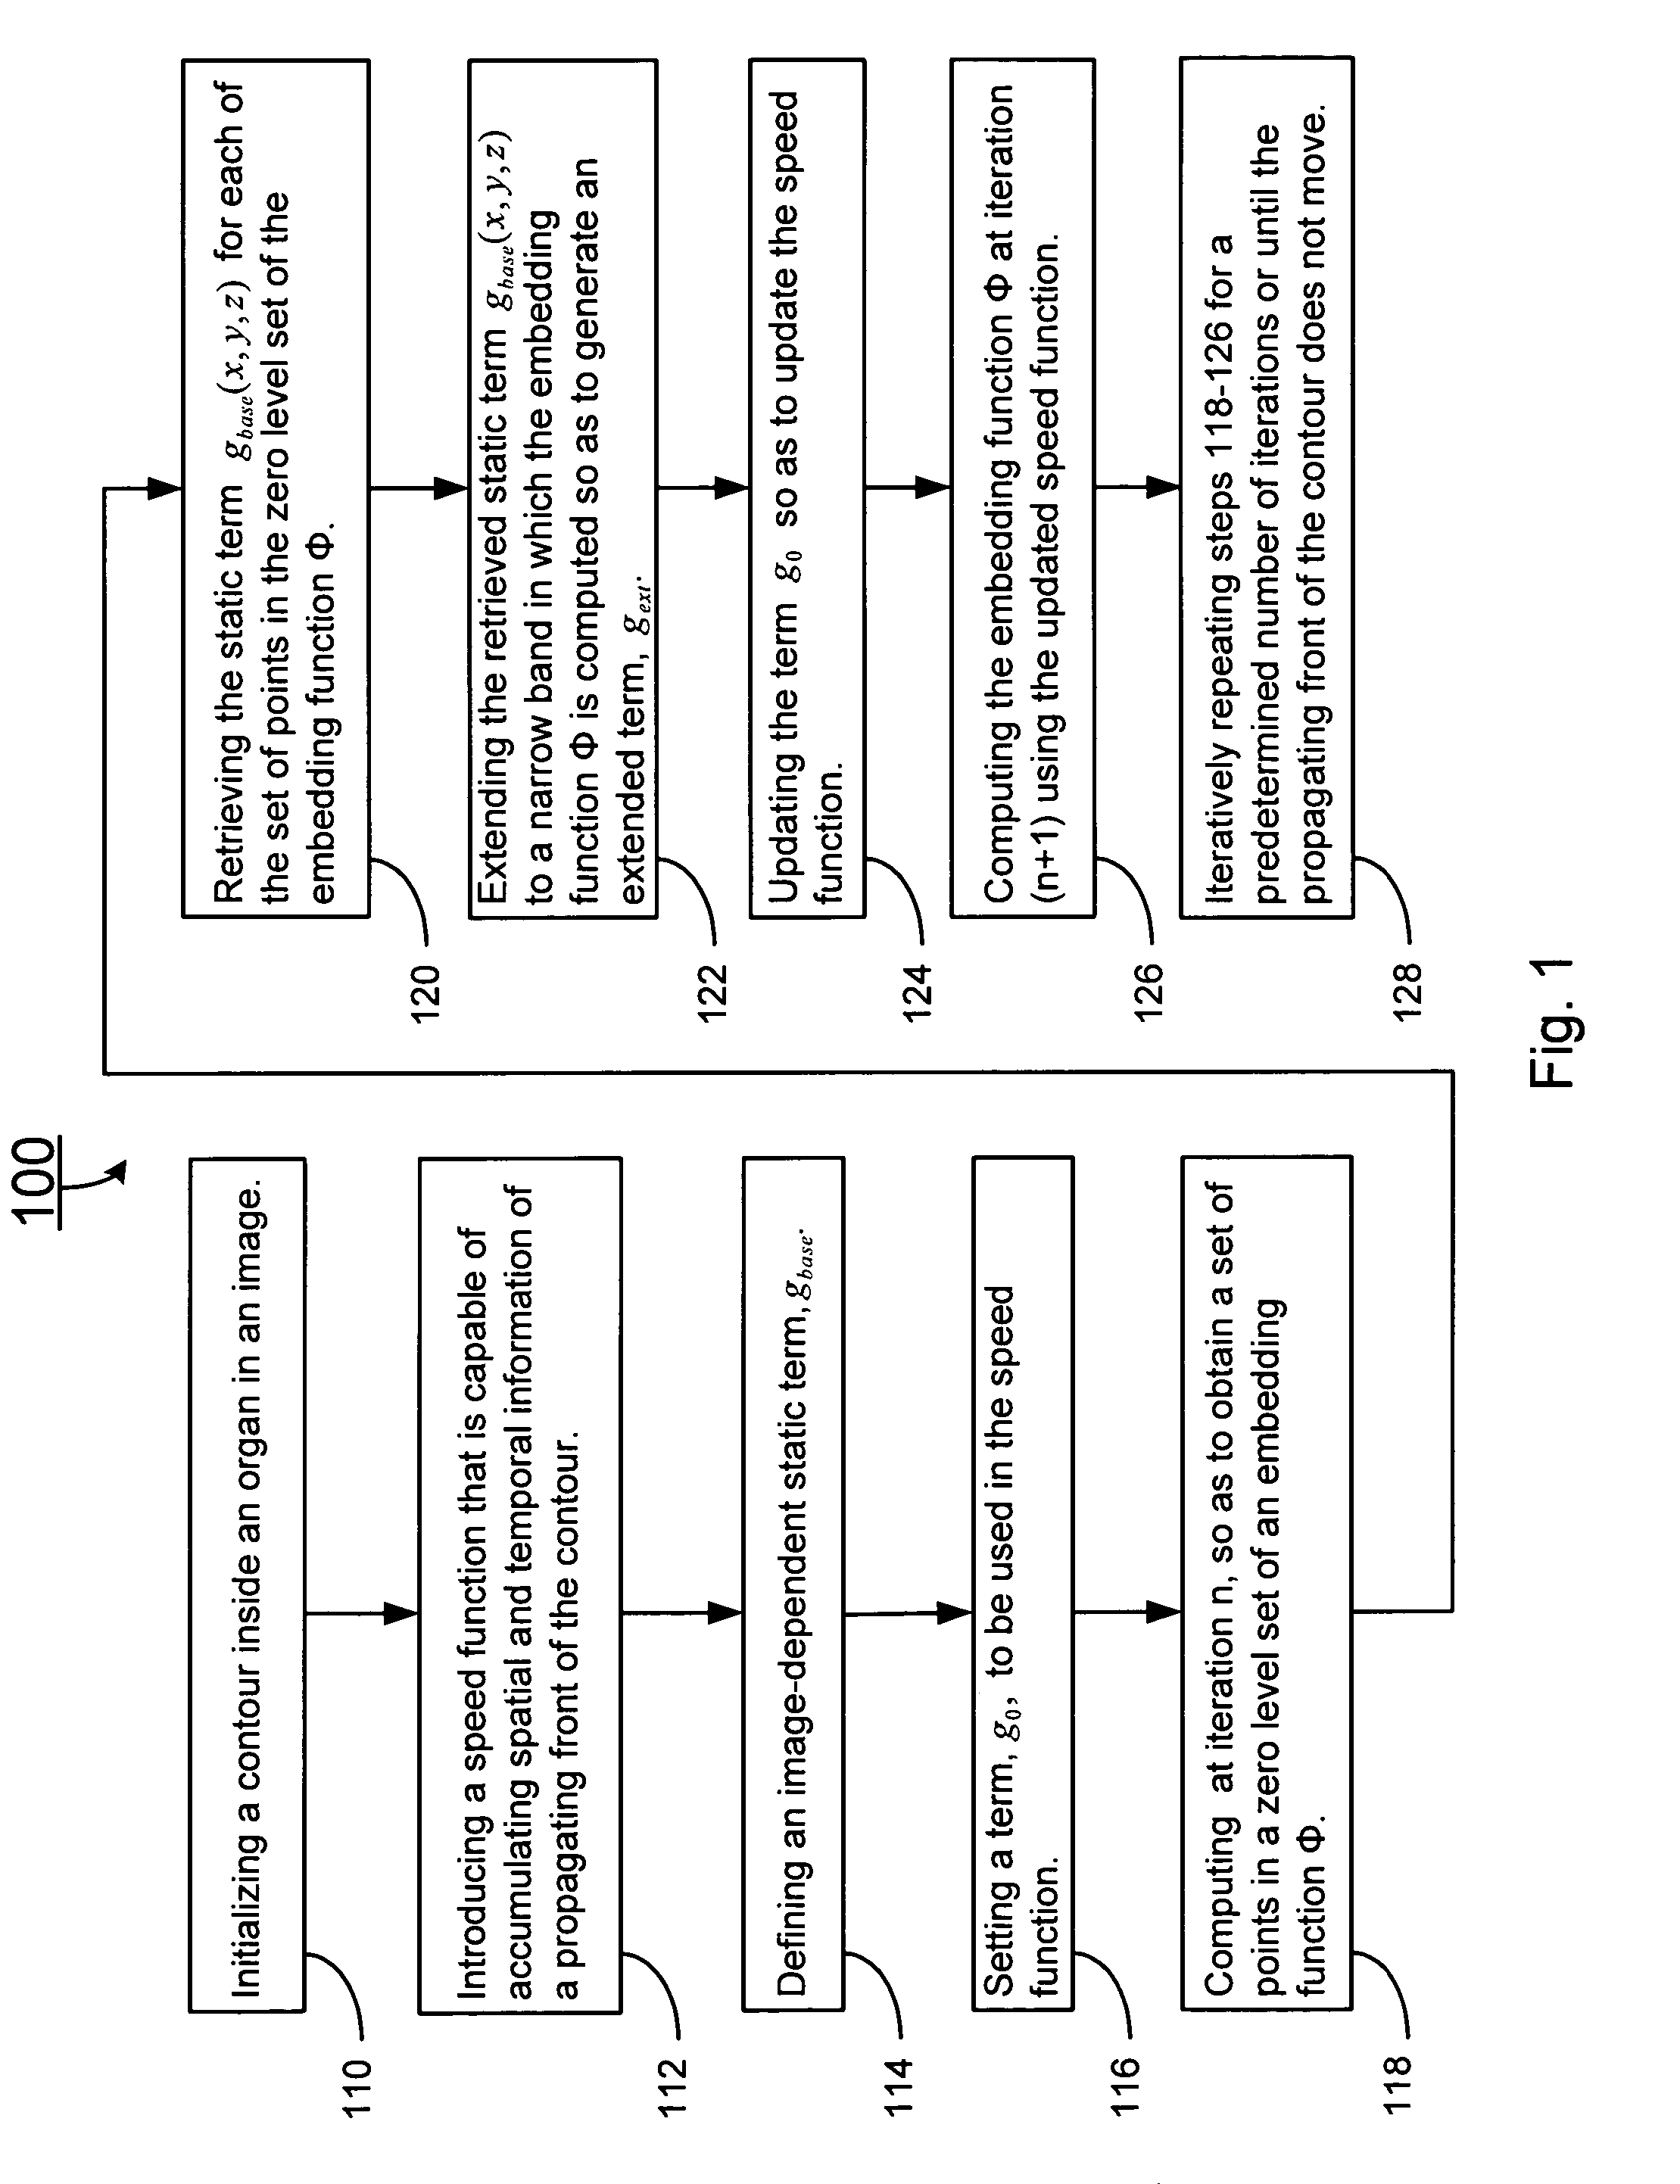 System and methods of organ segmentation and applications of same